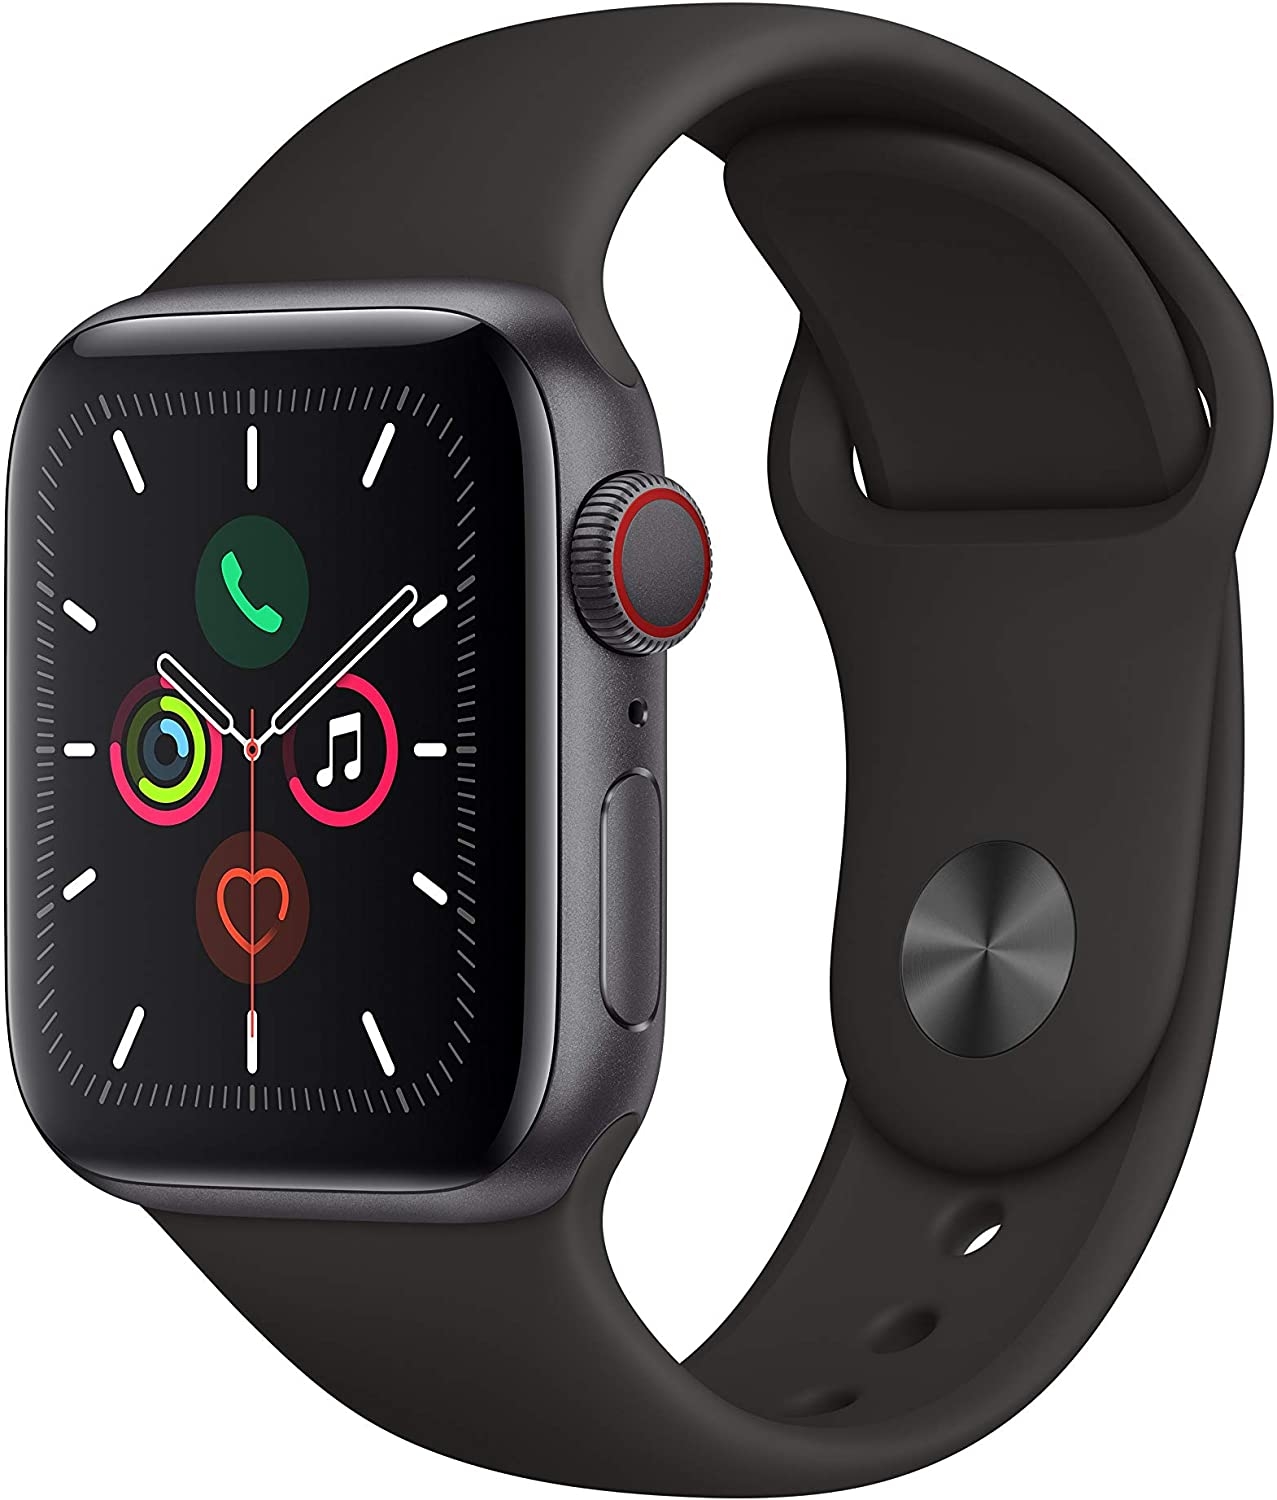 thumbnail 47 - Apple Watch Series 5 40mm 44mm - GPS Only or GPS + Cellular - Various colors